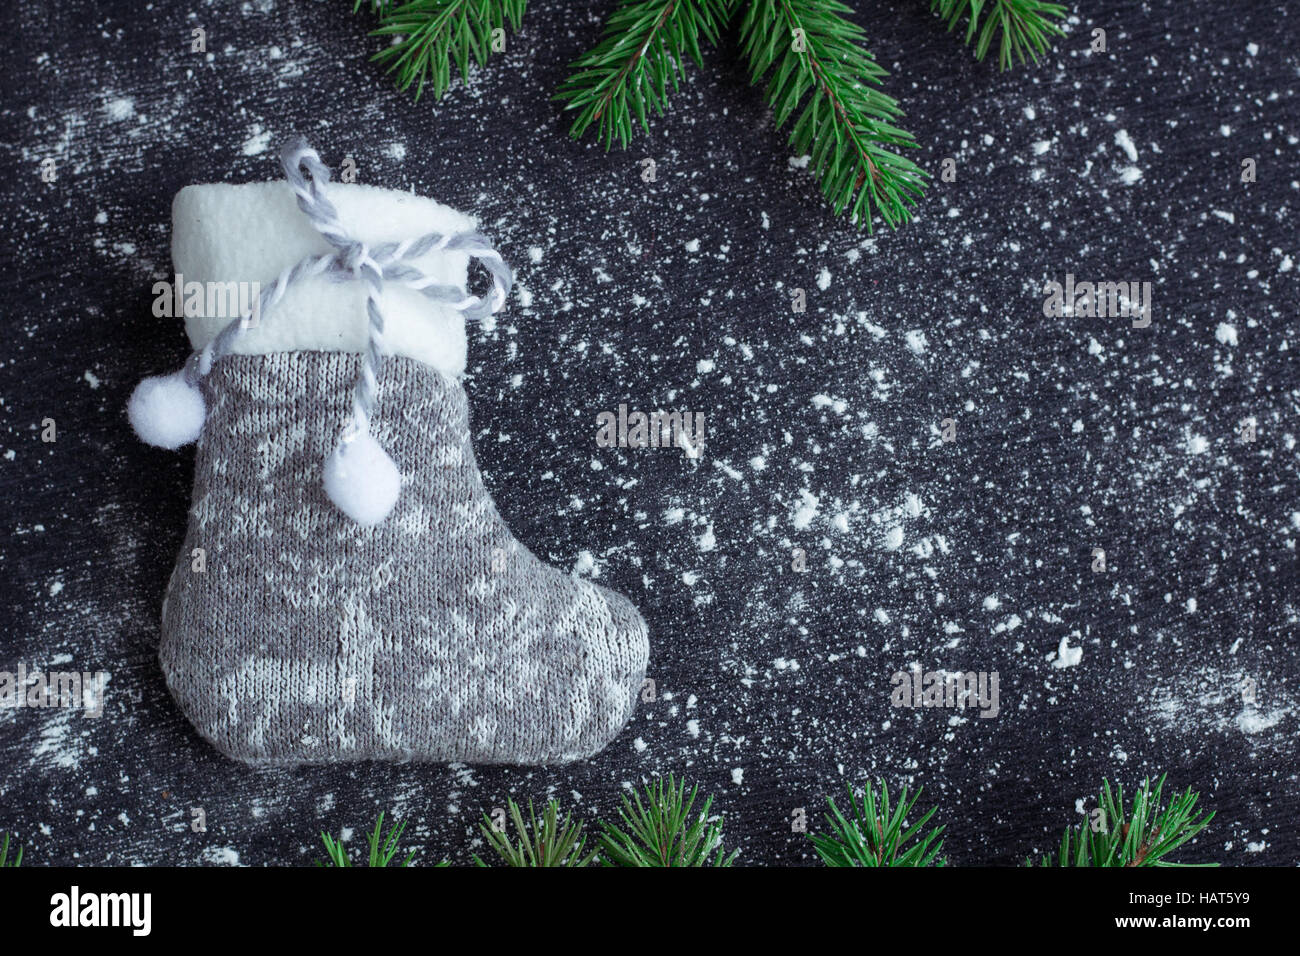 Christmas and New Year winter holiday snowbound composition of grey stocking on black space background with green fir tree branches Stock Photo